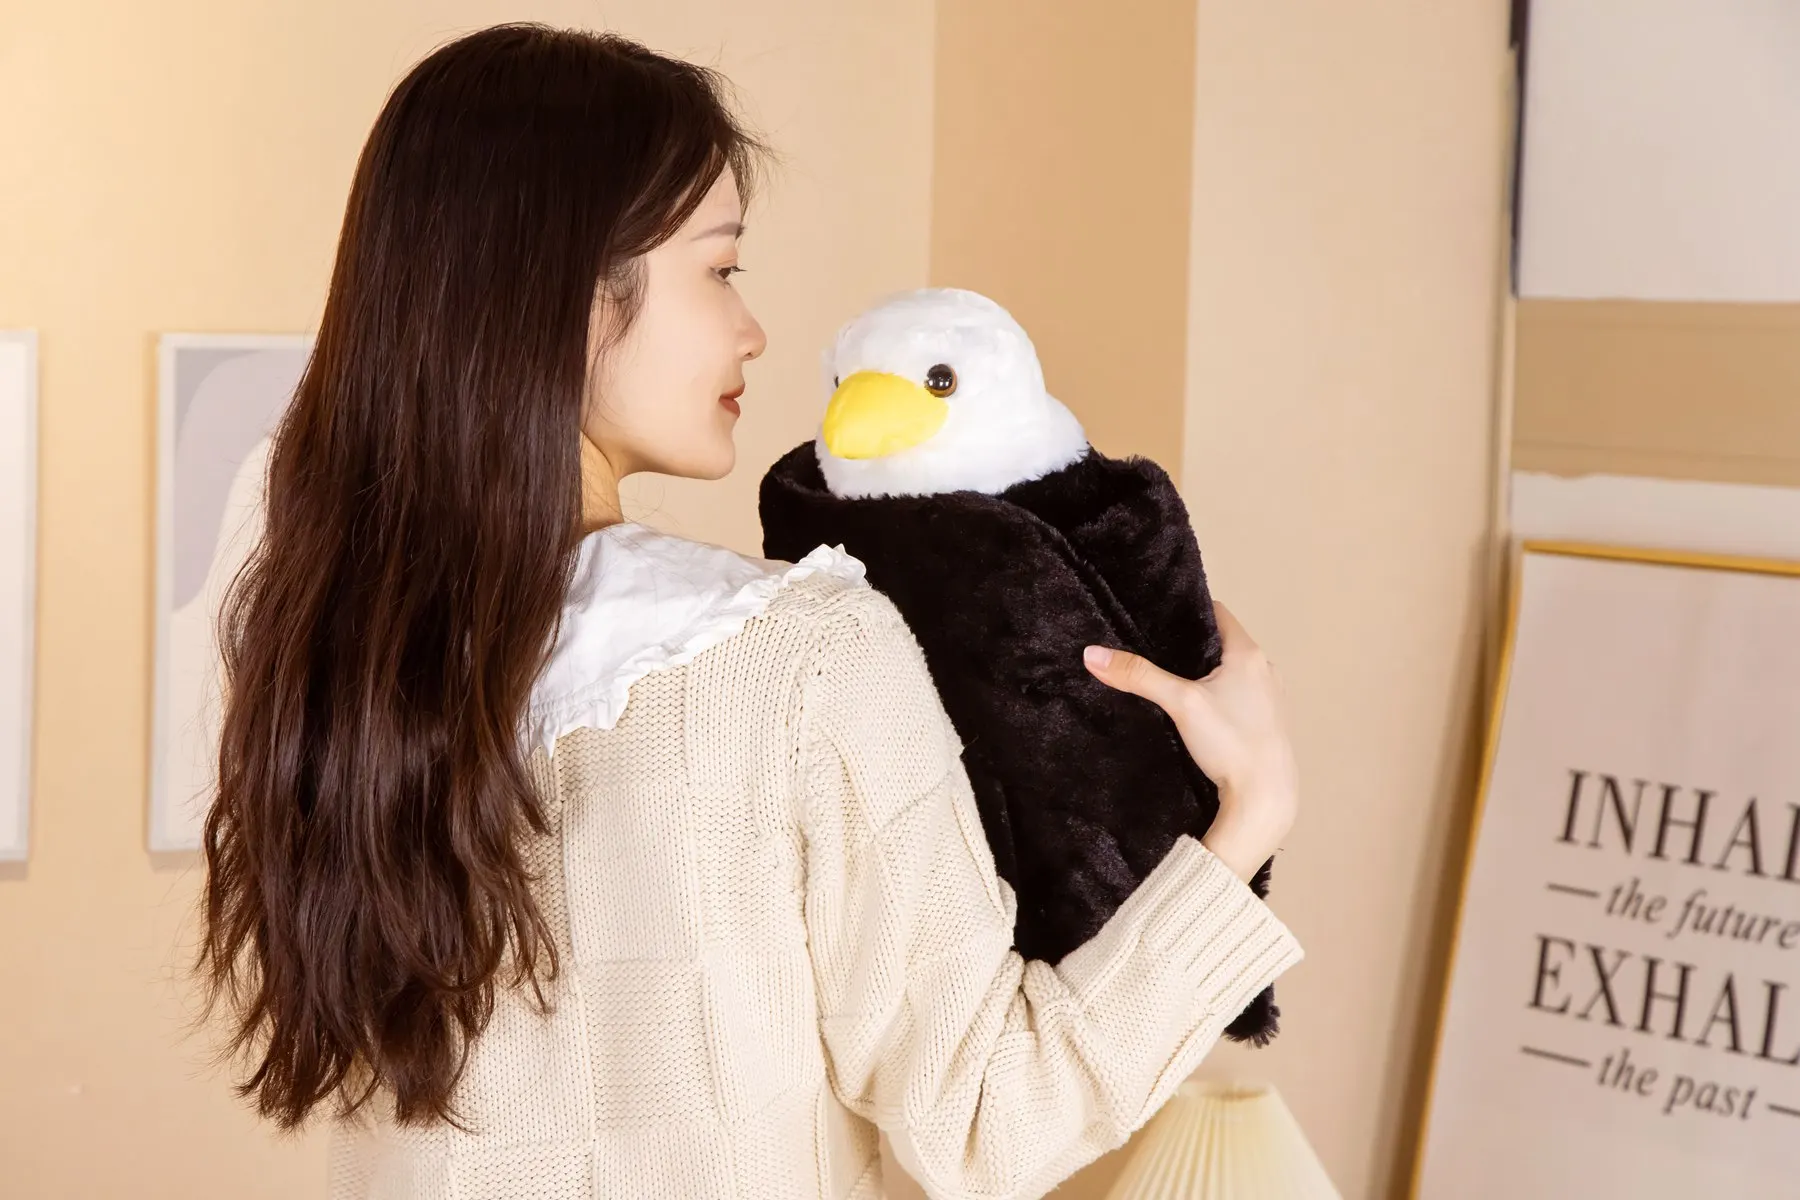 soft animals World best selling products reindeer eagle wholesale present birds plush toy